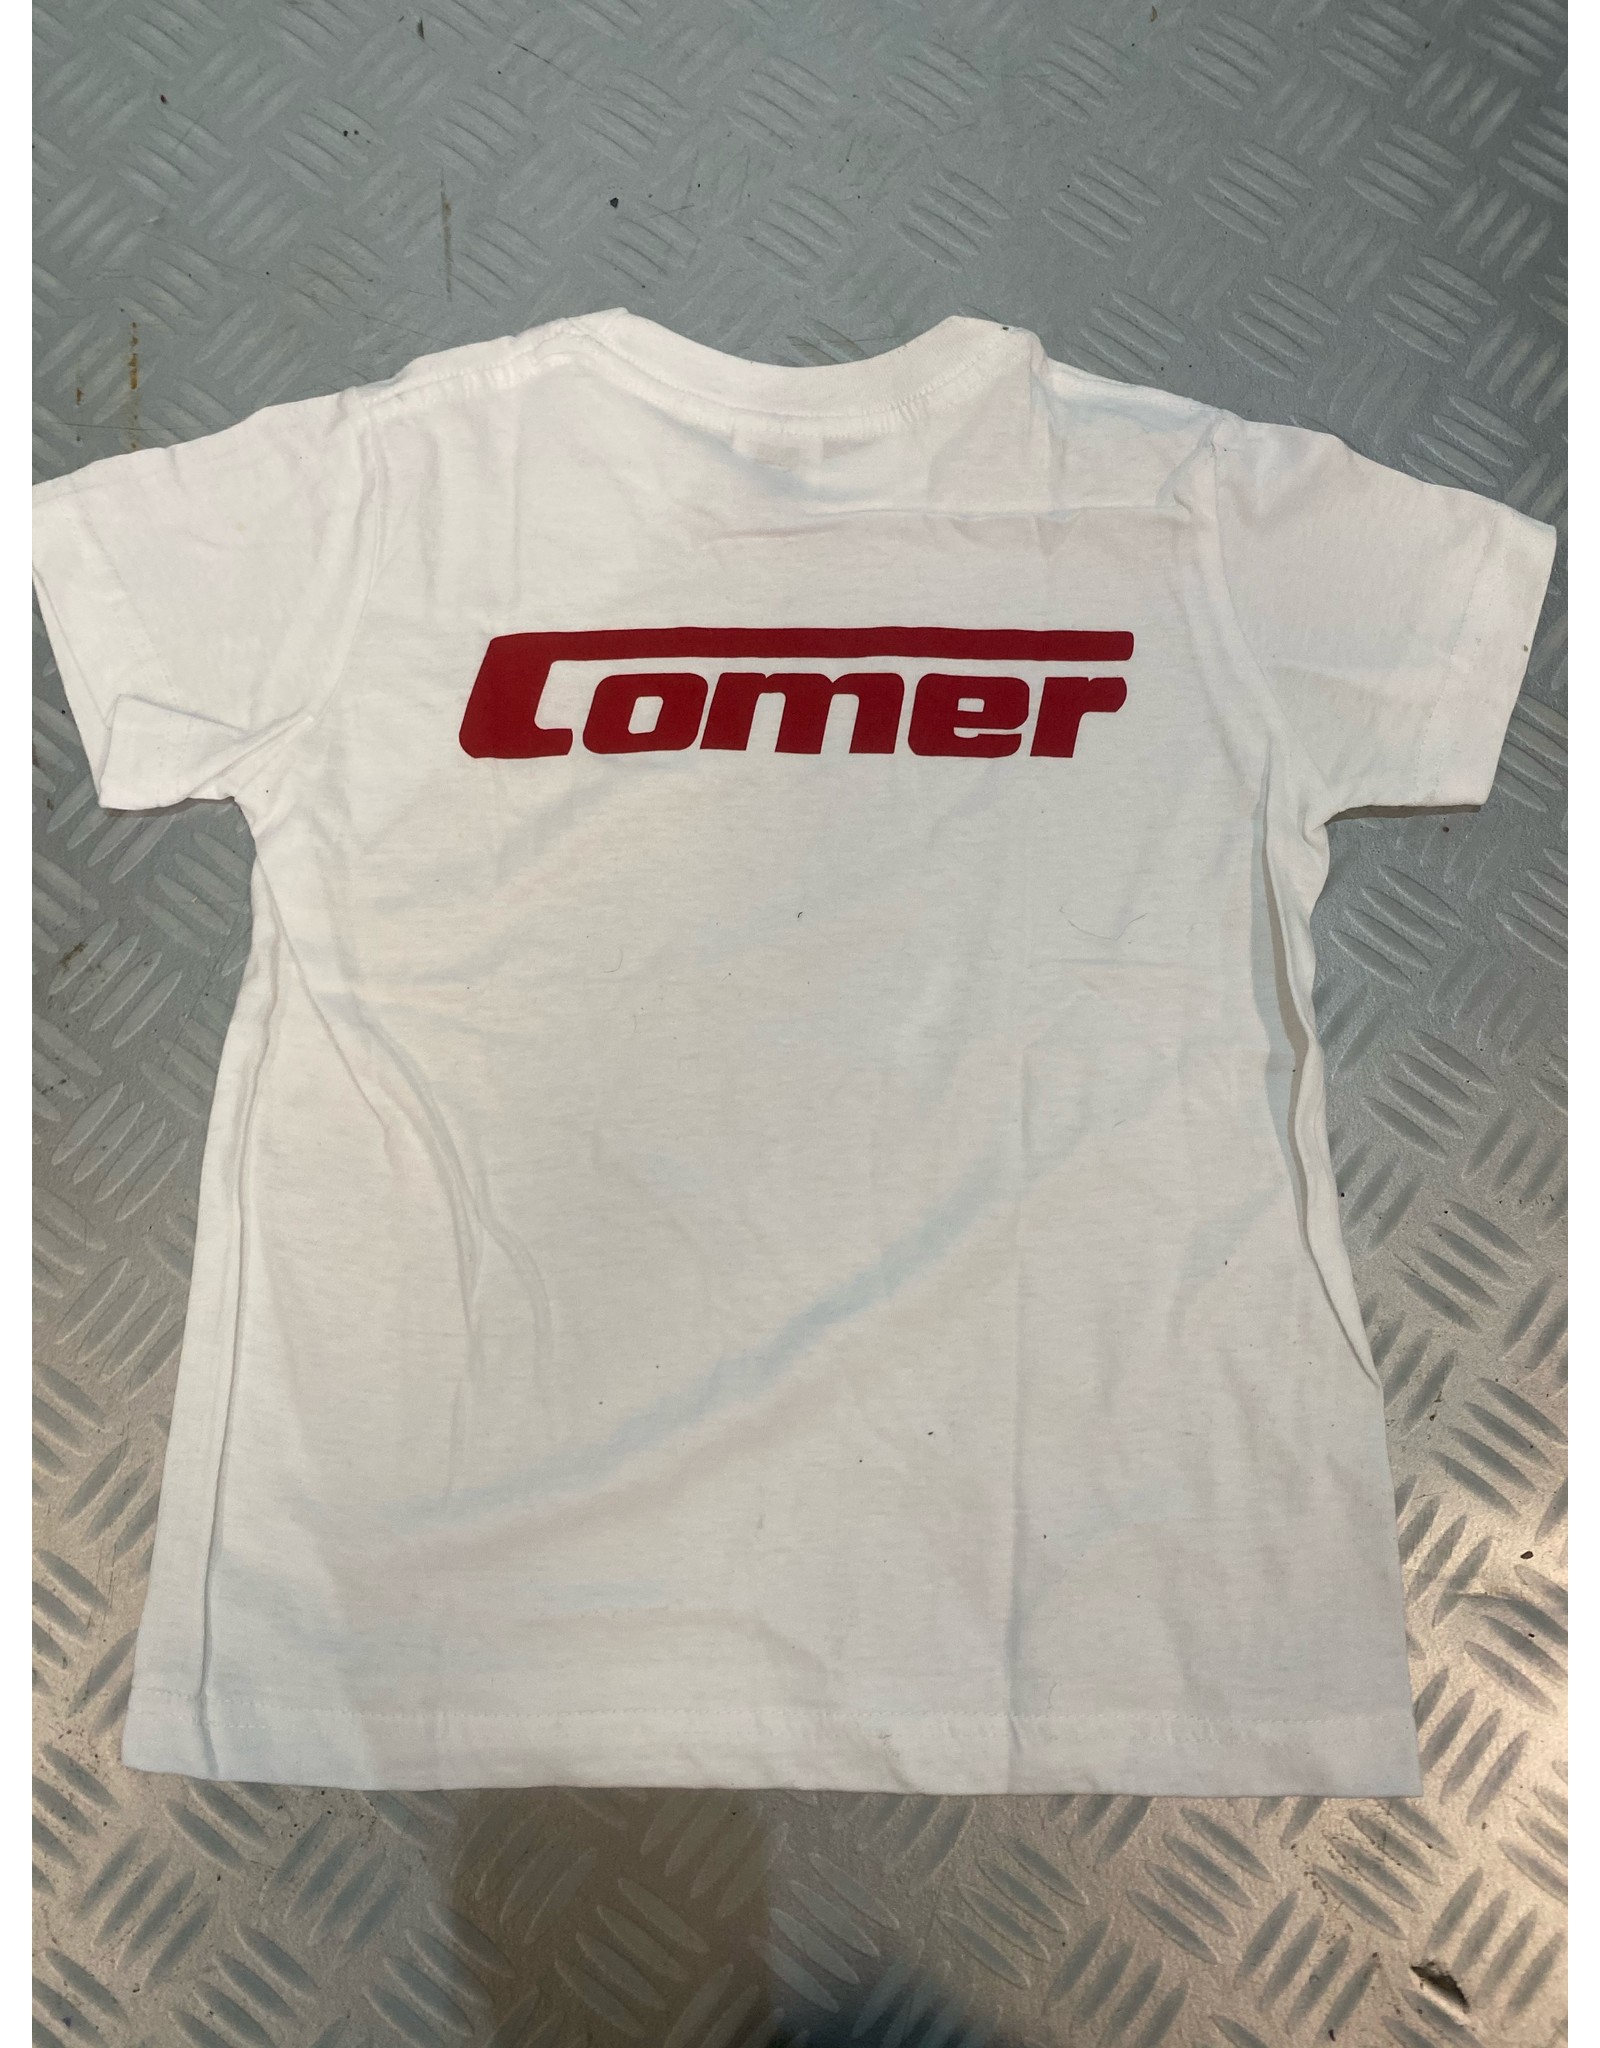 Comer Comer T-shirt size 7 / 8 Years